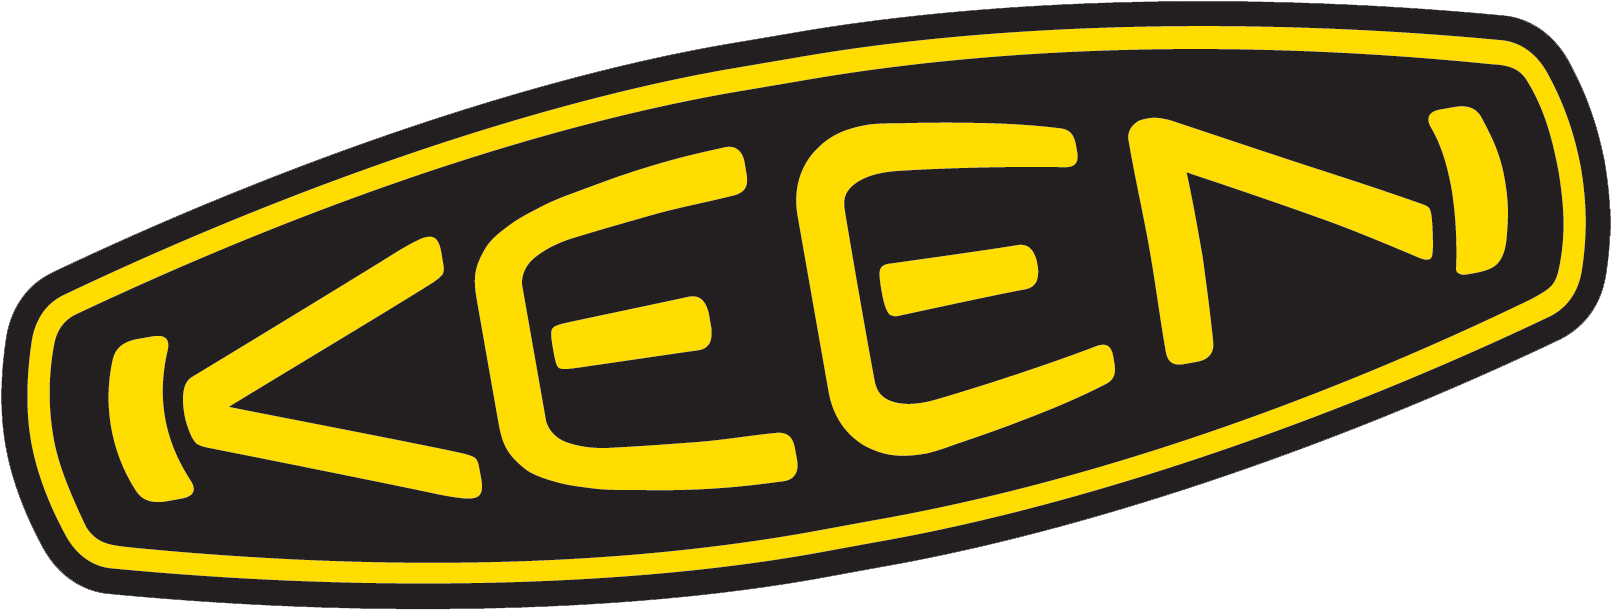 Brought To You By - Keen Footwear Logo (1616x616)